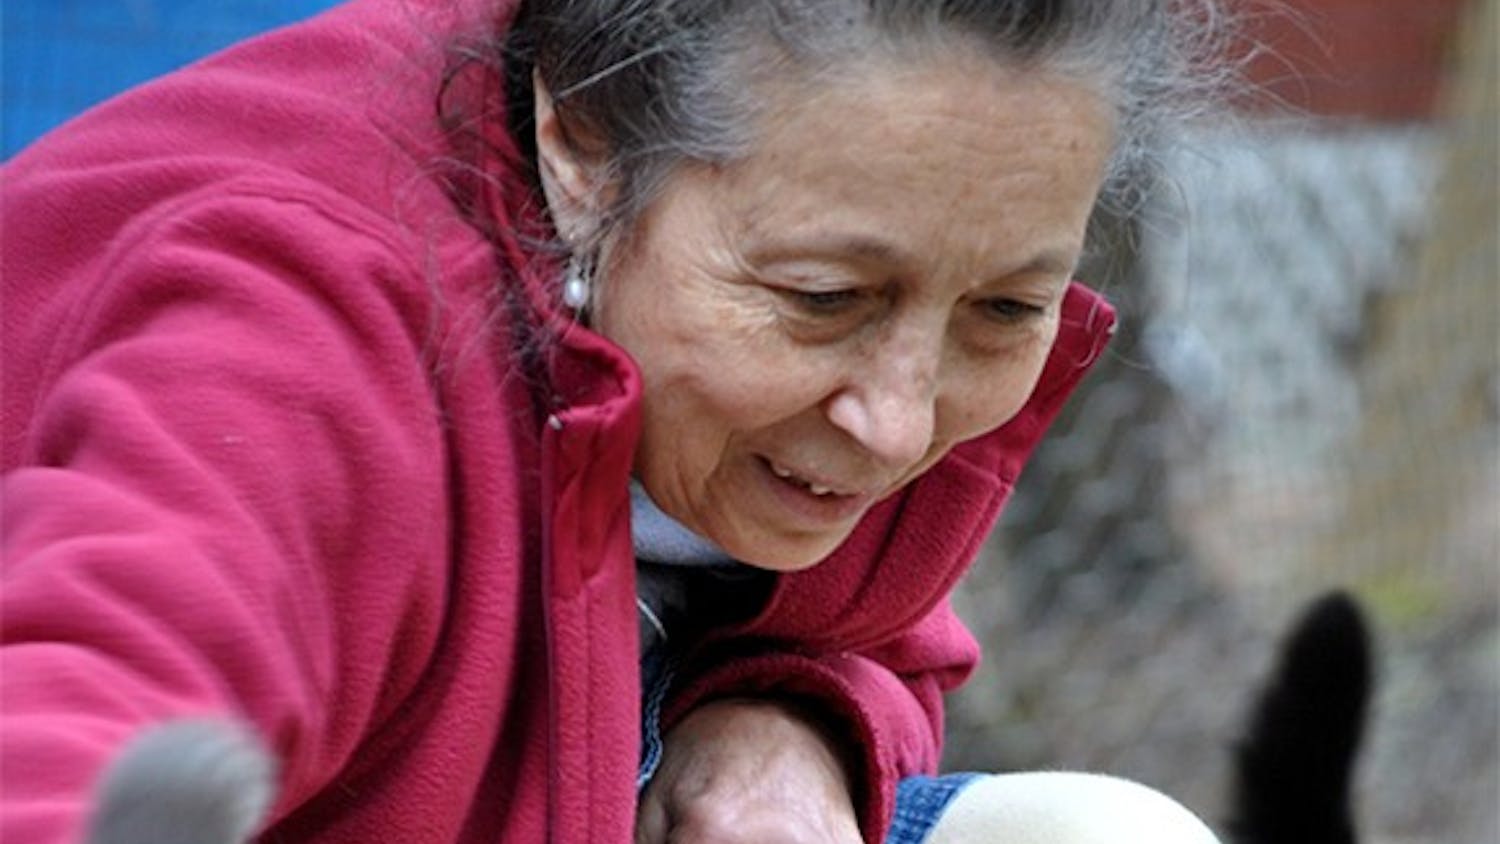 Siglinda Scarpa, founder of the Goathouse Refuge, stops to pet one of her around 200 cats.